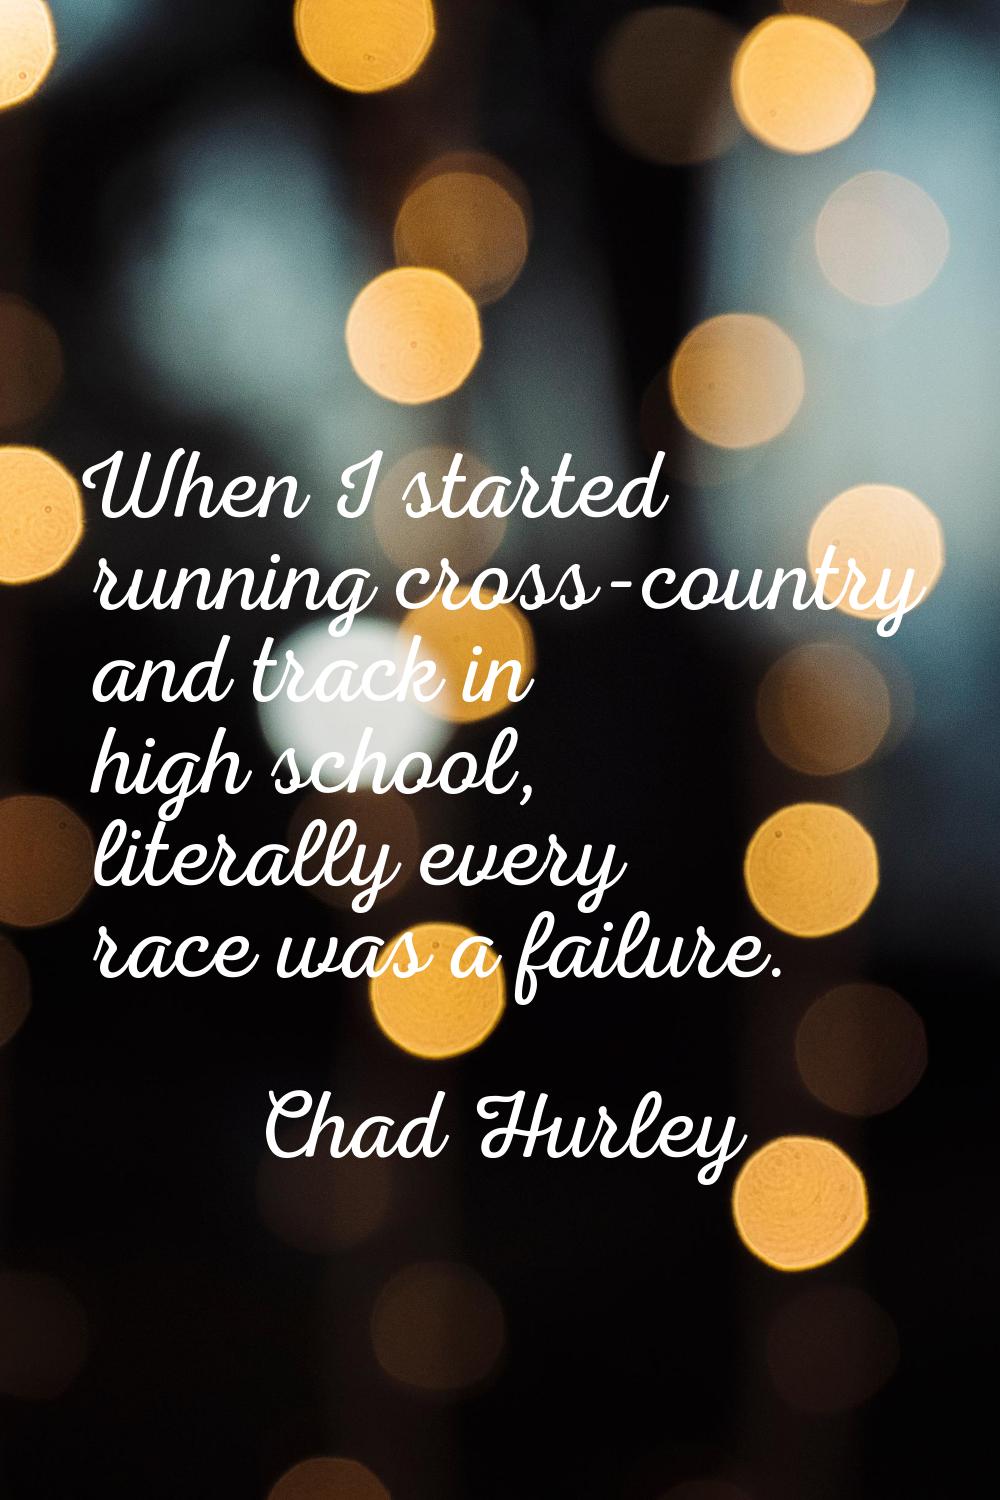 When I started running cross-country and track in high school, literally every race was a failure.